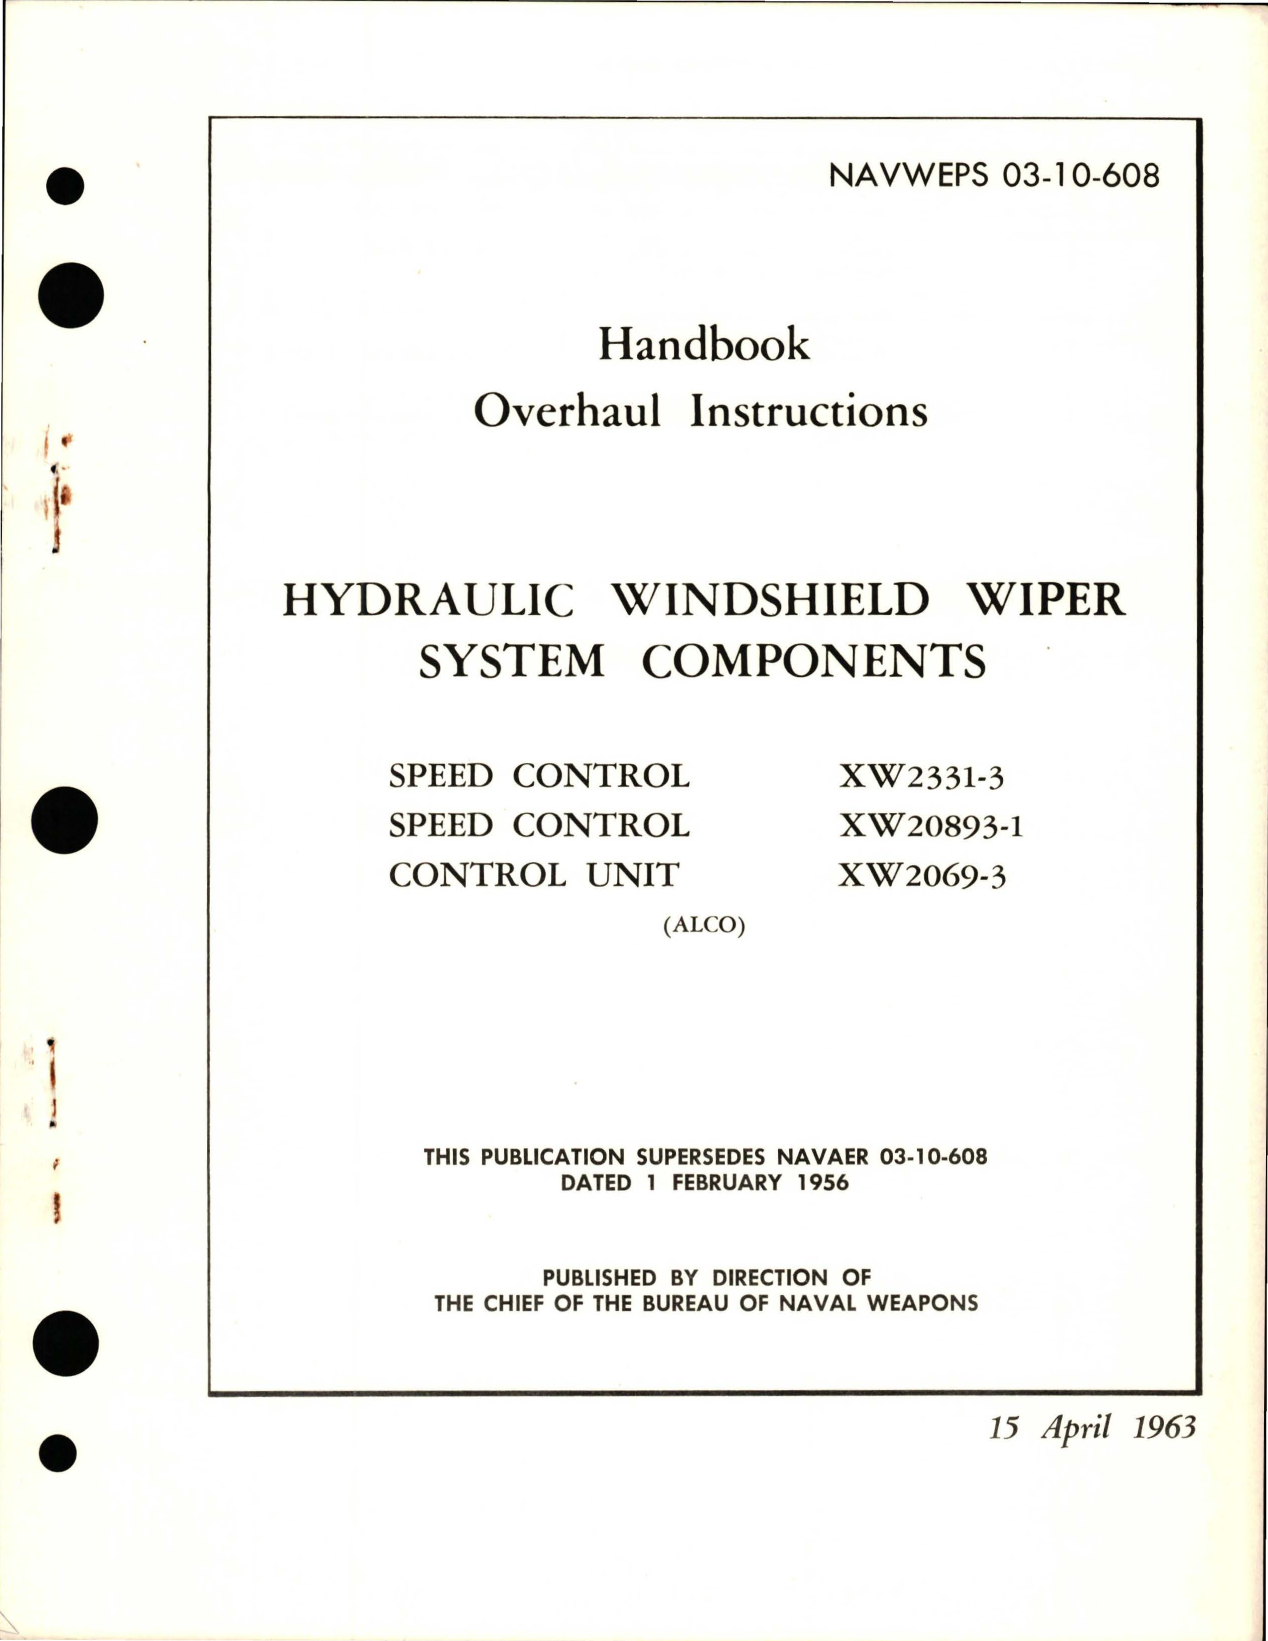 Sample page 1 from AirCorps Library document: Overhaul Instructions for Hydraulic Windshield Wiper System Components - Control Unit XW2069-3, Speed Control XW2331-3, and 20893-1